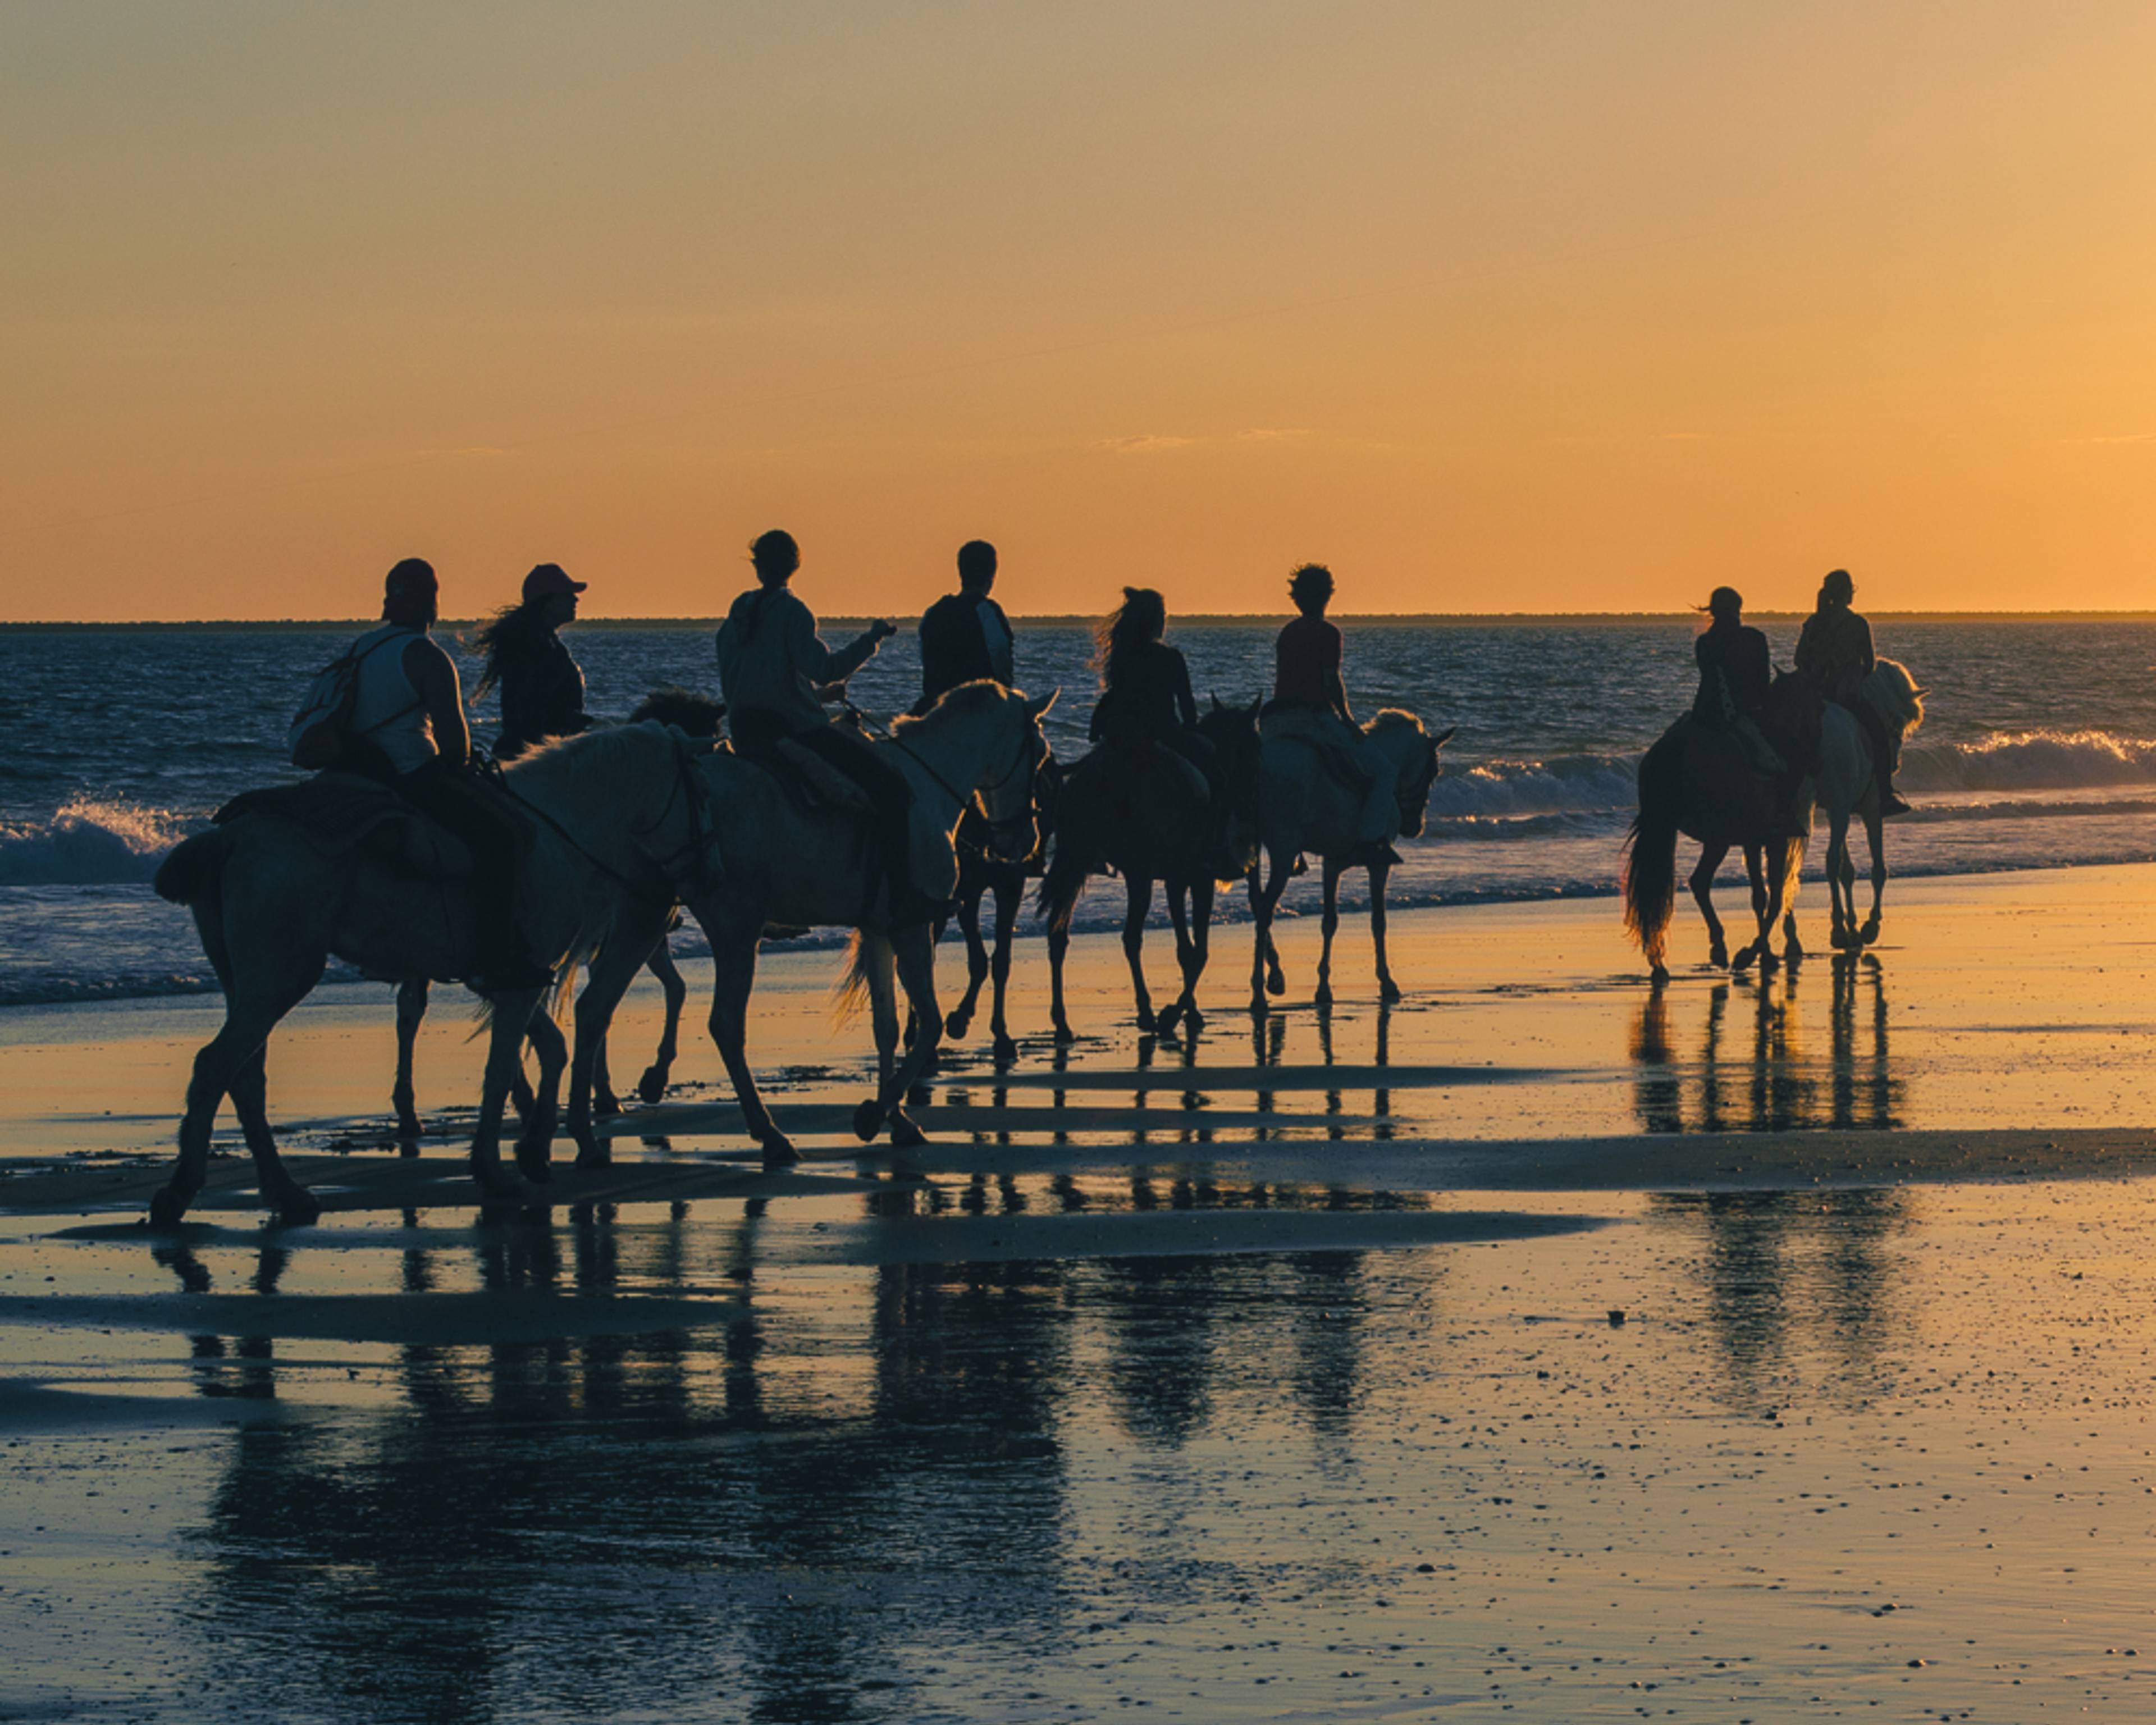 Experience horseback riding in Spain with a local expert